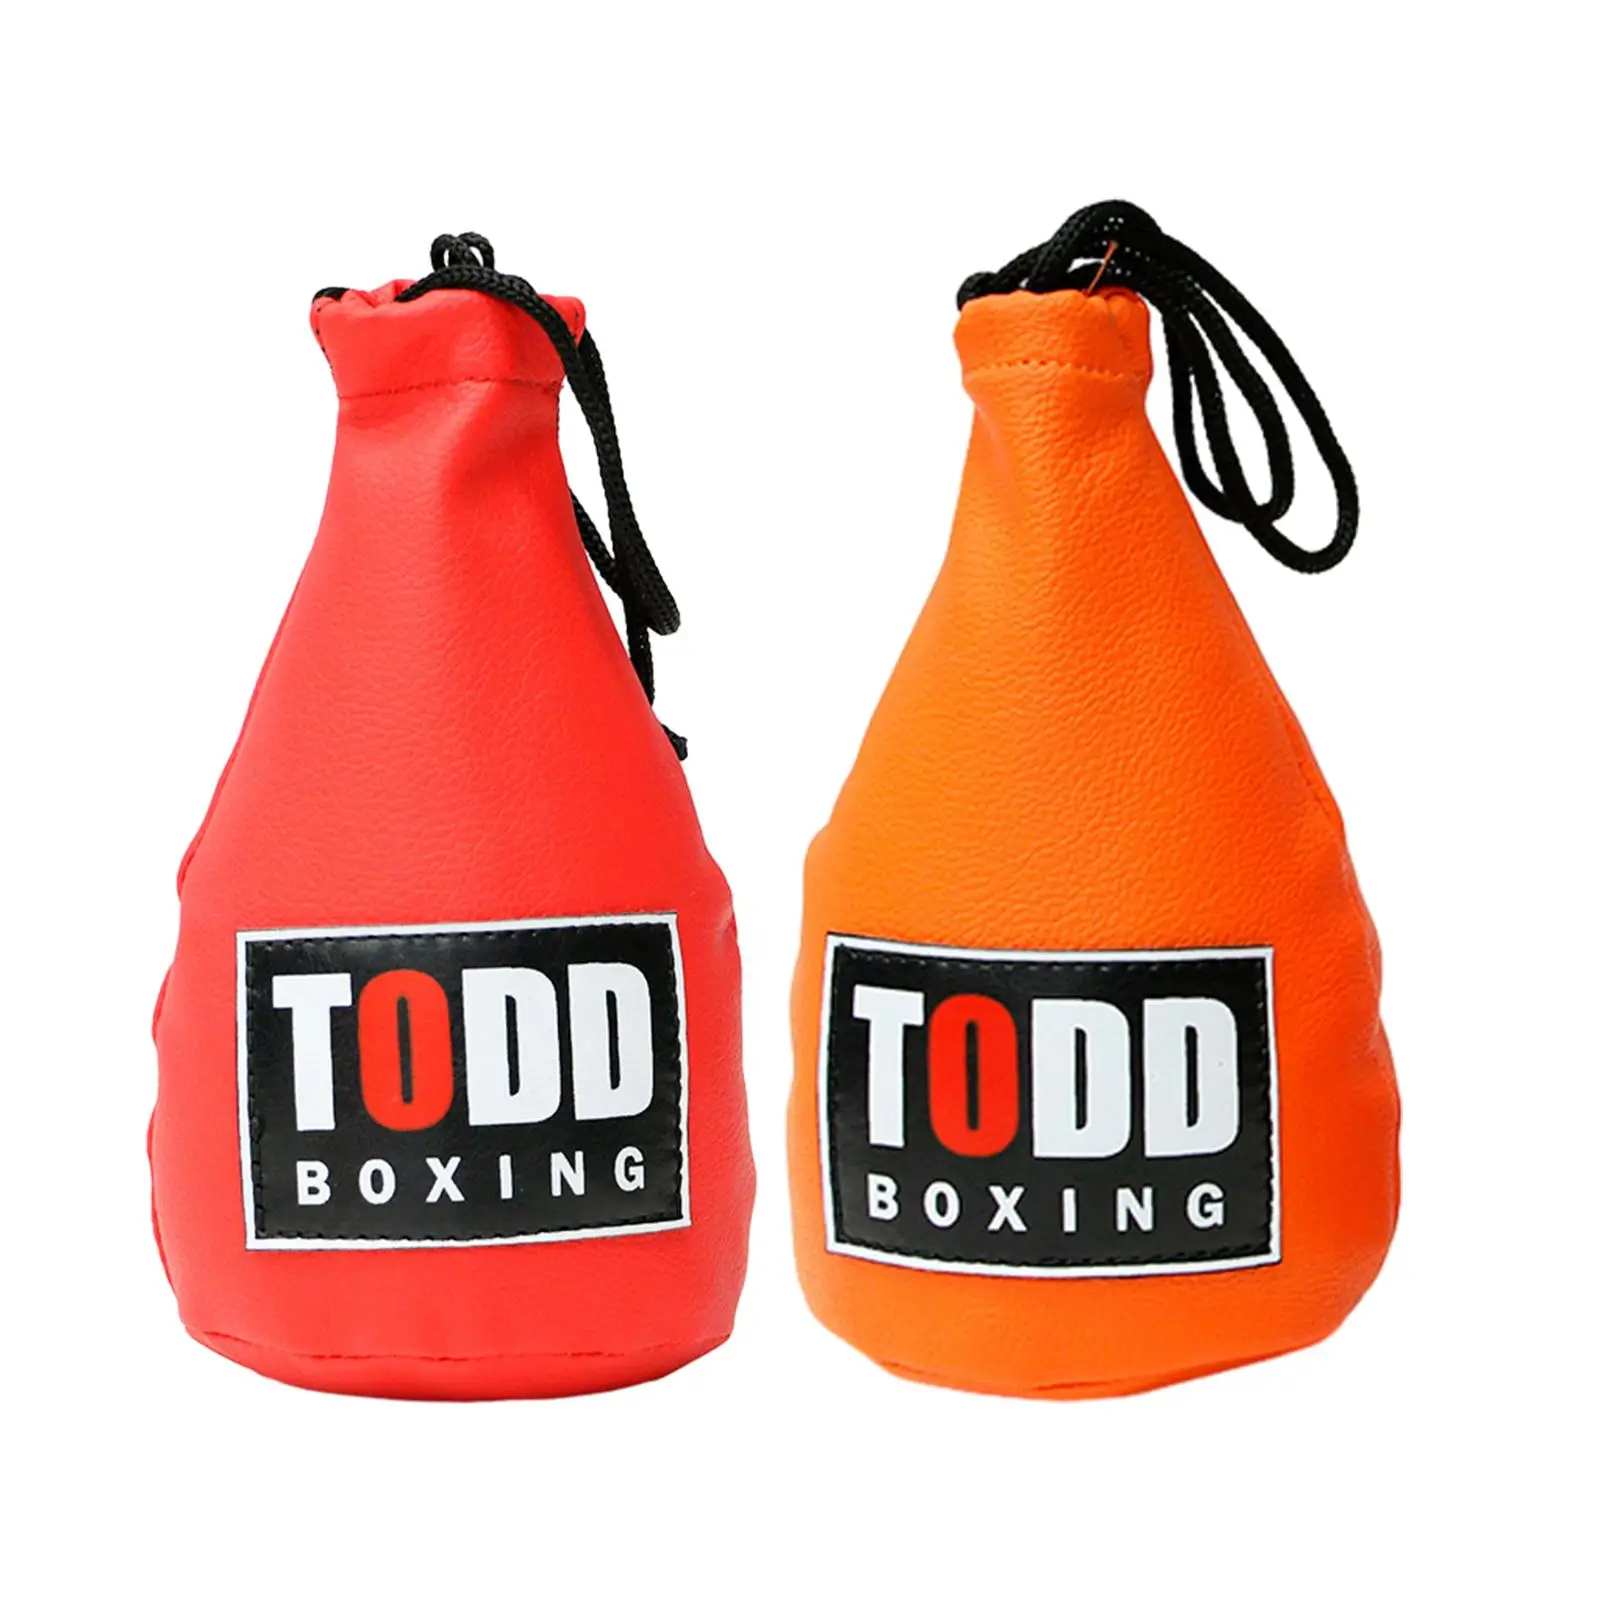 Boxing Punch Bag Adults Reaction Training Dodge Reaction Bag for Hand Eye Coordination Agility Punching Speed Reaction Workout